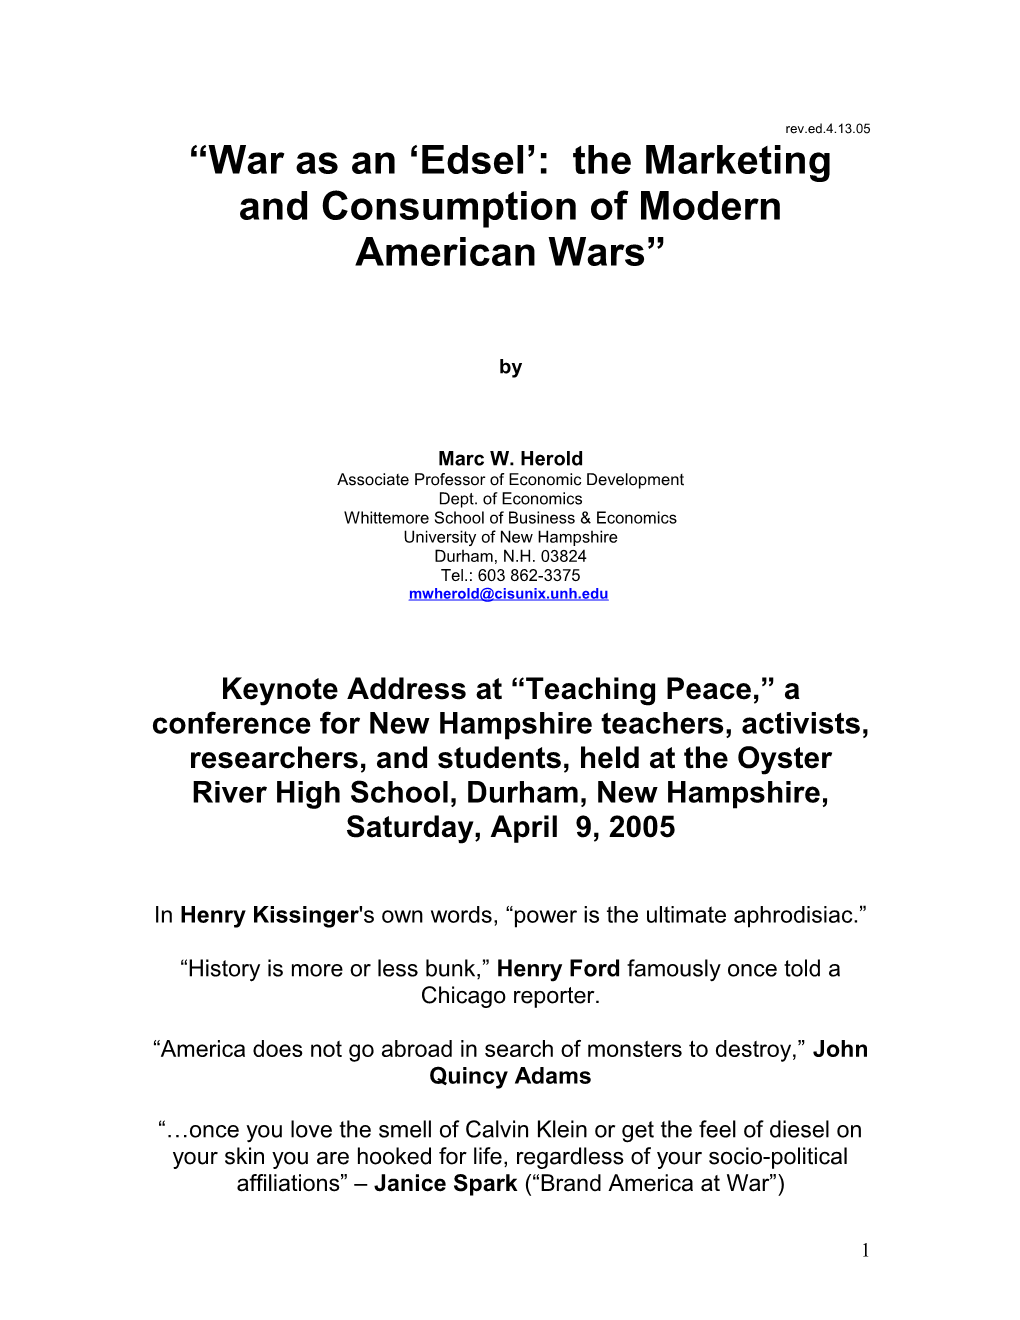 War As an Edsel : the Marketing and Consumption of Modern American Wars